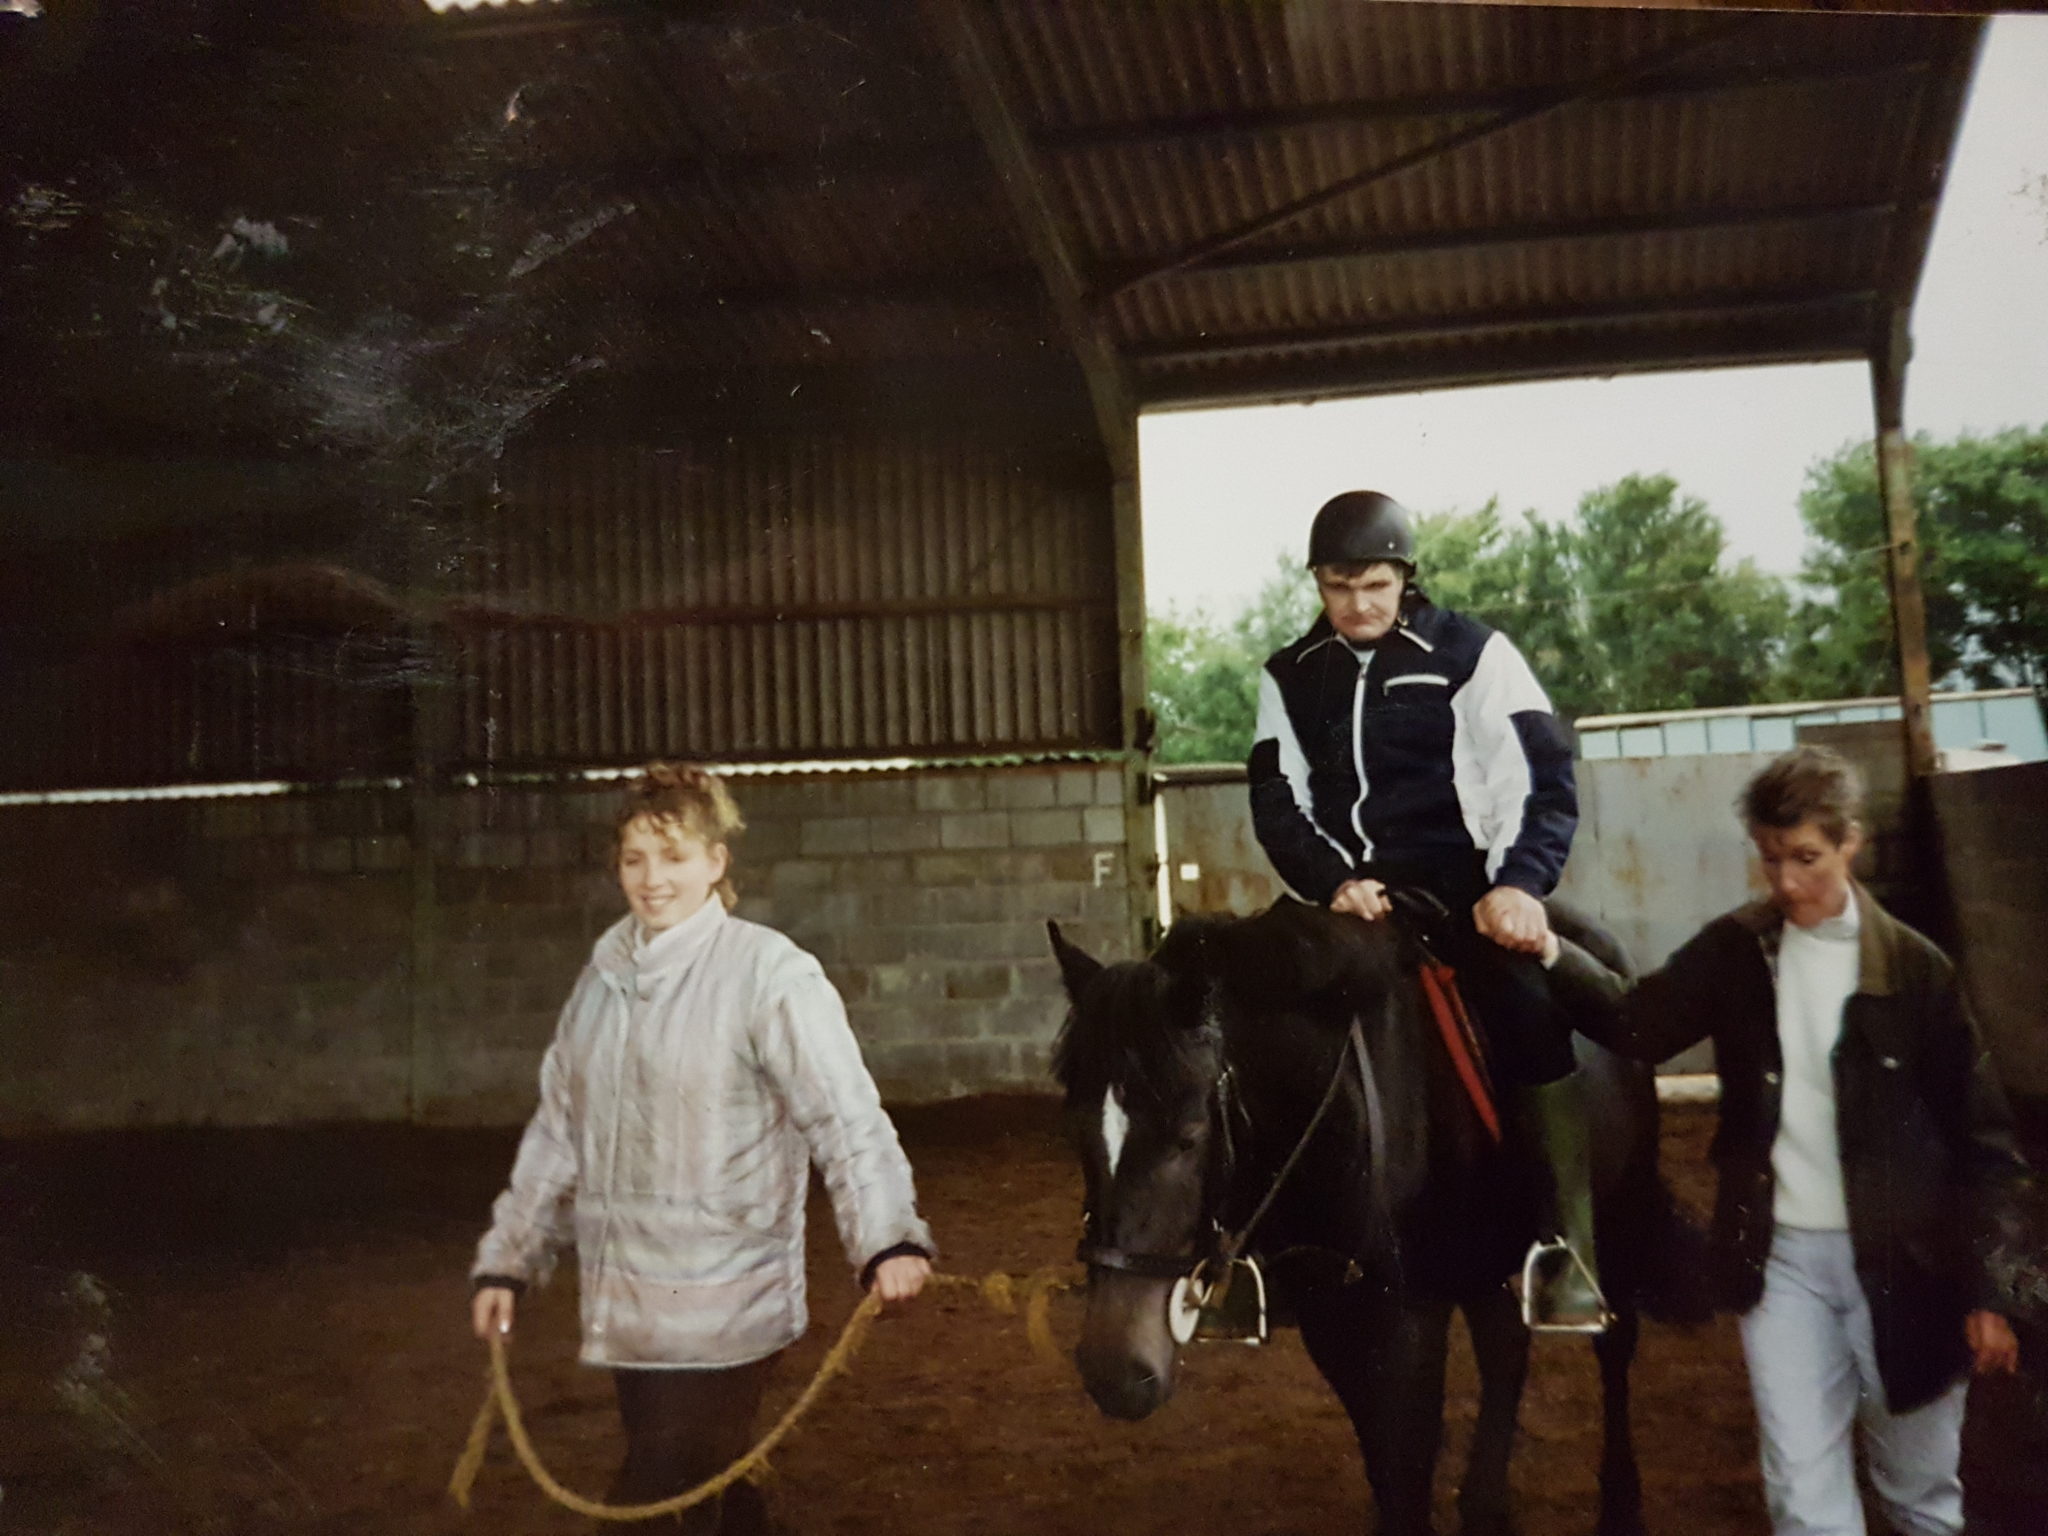 Colin loved horses